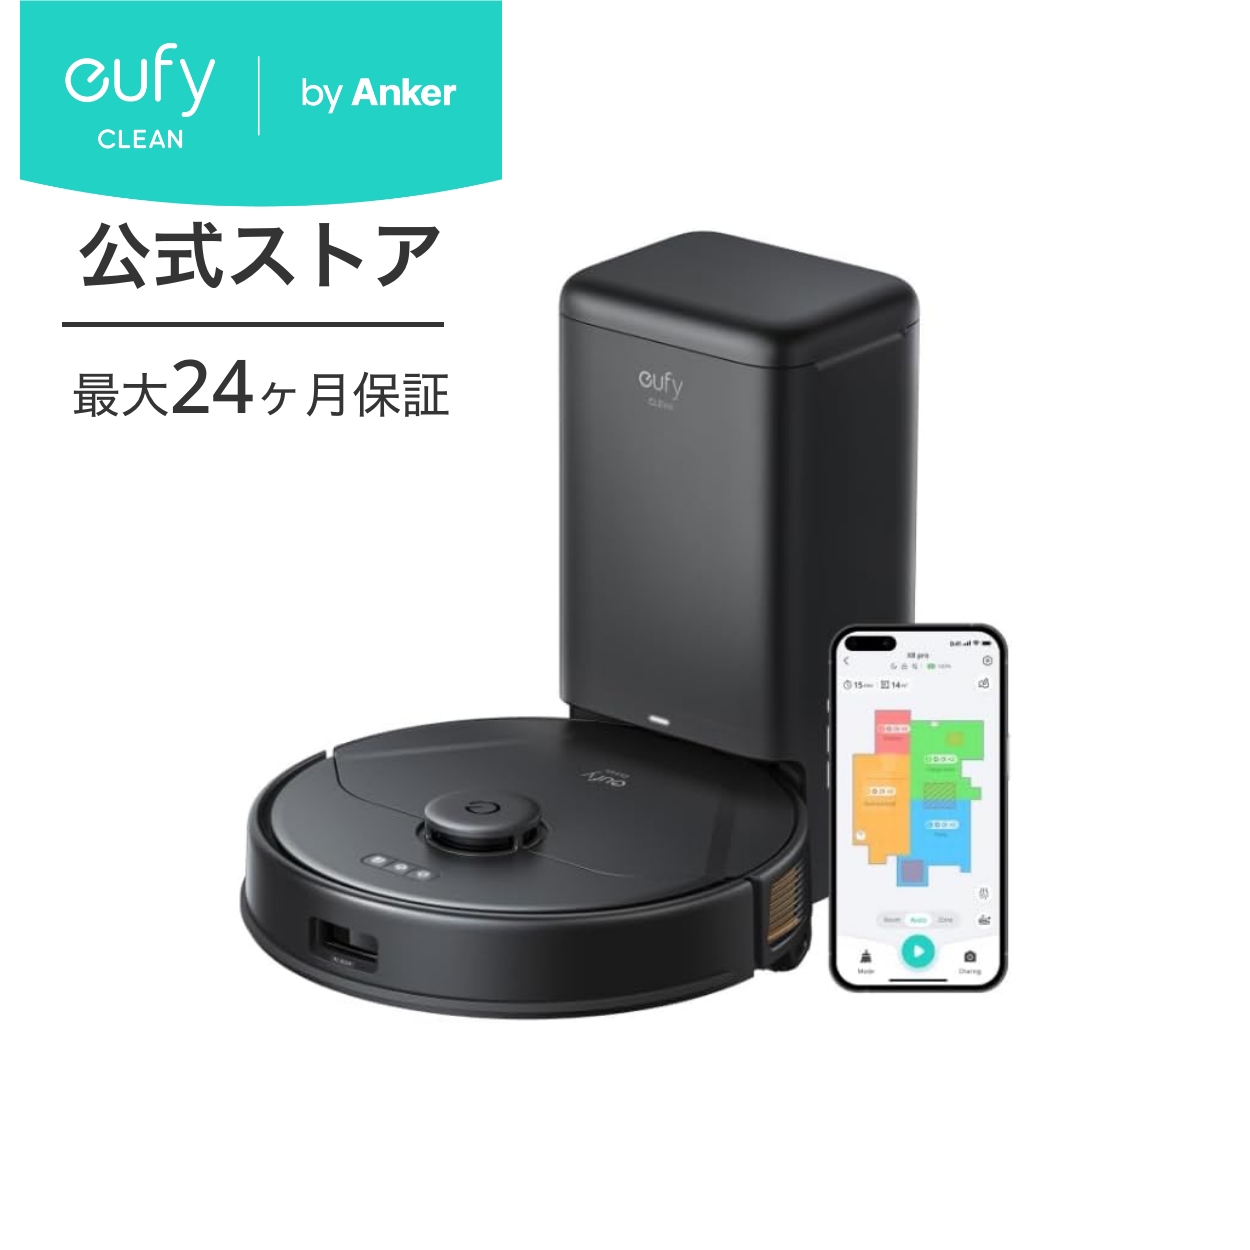 Anker Eufy Clean (ユーフィクリーン) X8 Pro with Self-Empty Station (ロボット掃除機)画像